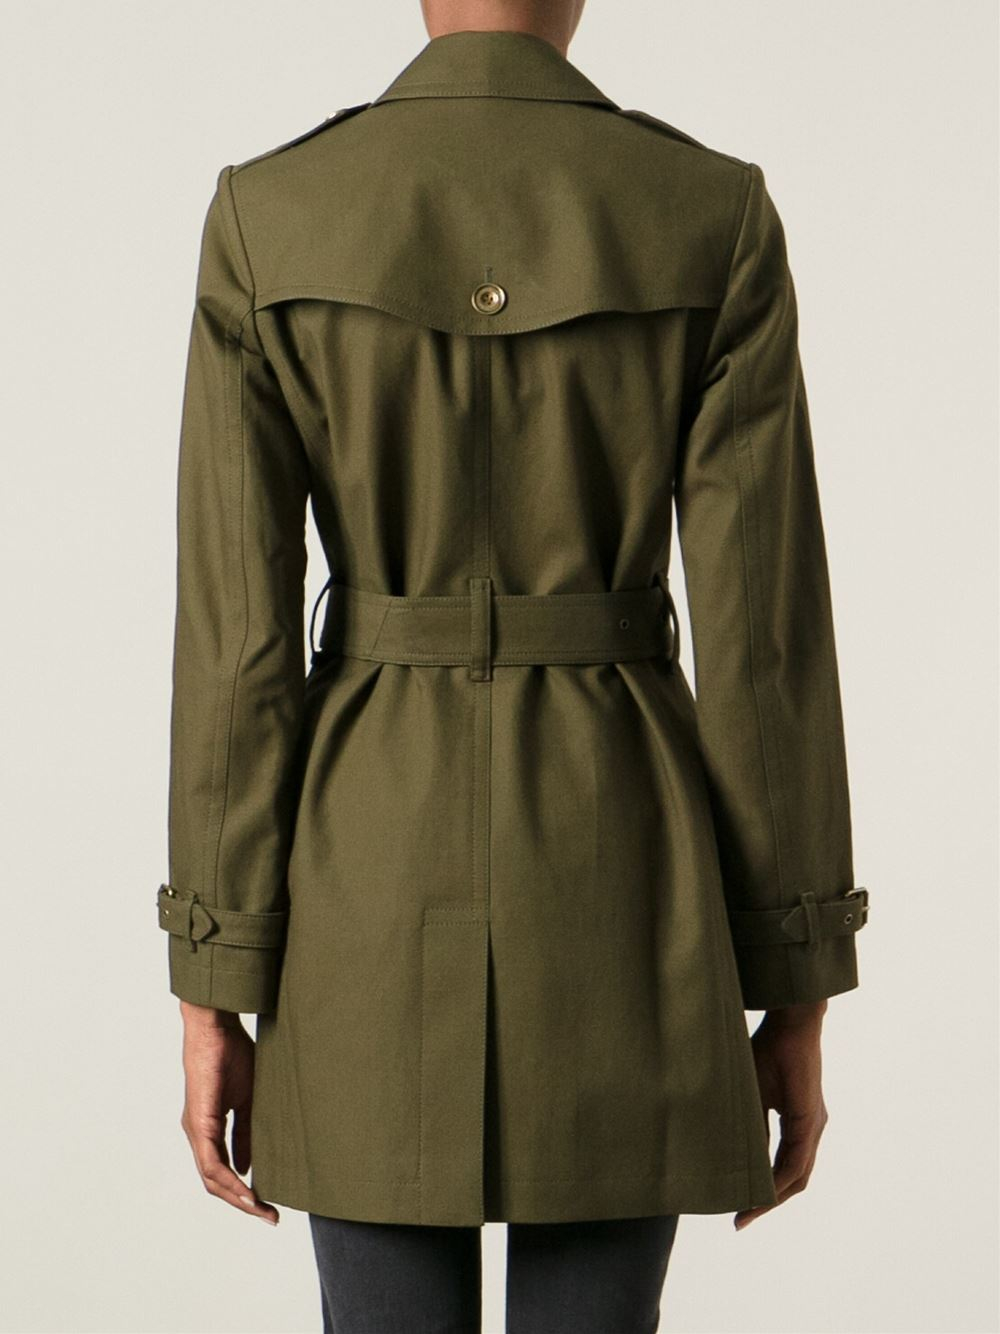 Burberry Military Trench Coat in Green - Lyst